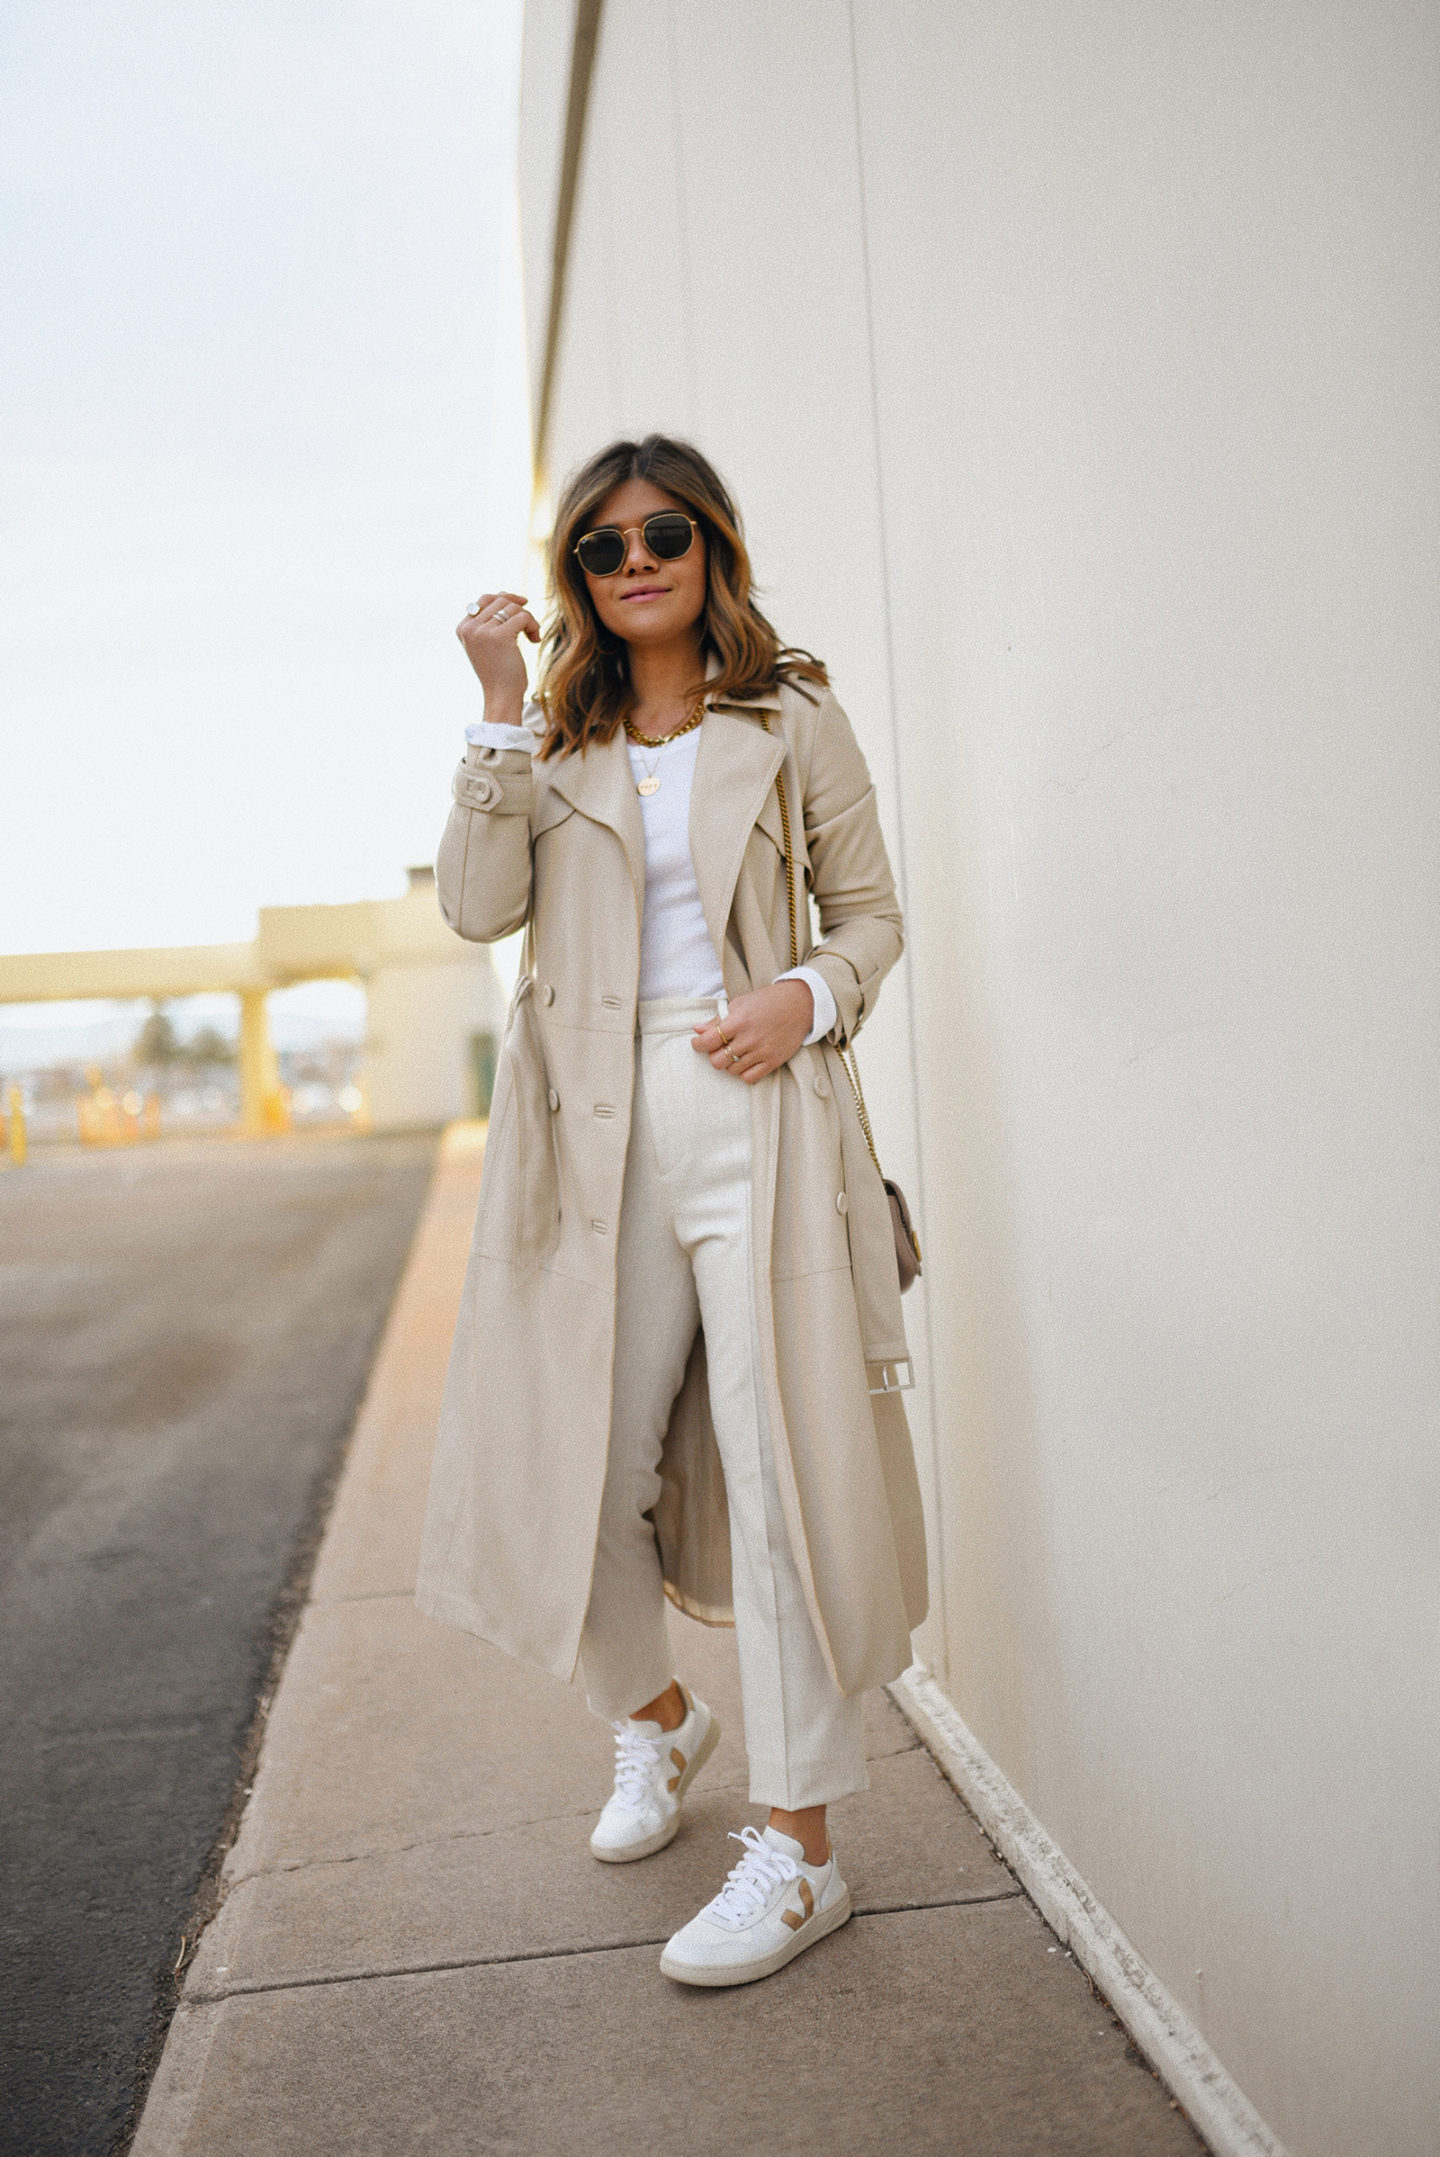 How to Style Trench Coats for Winter - OF LEATHER AND LACE